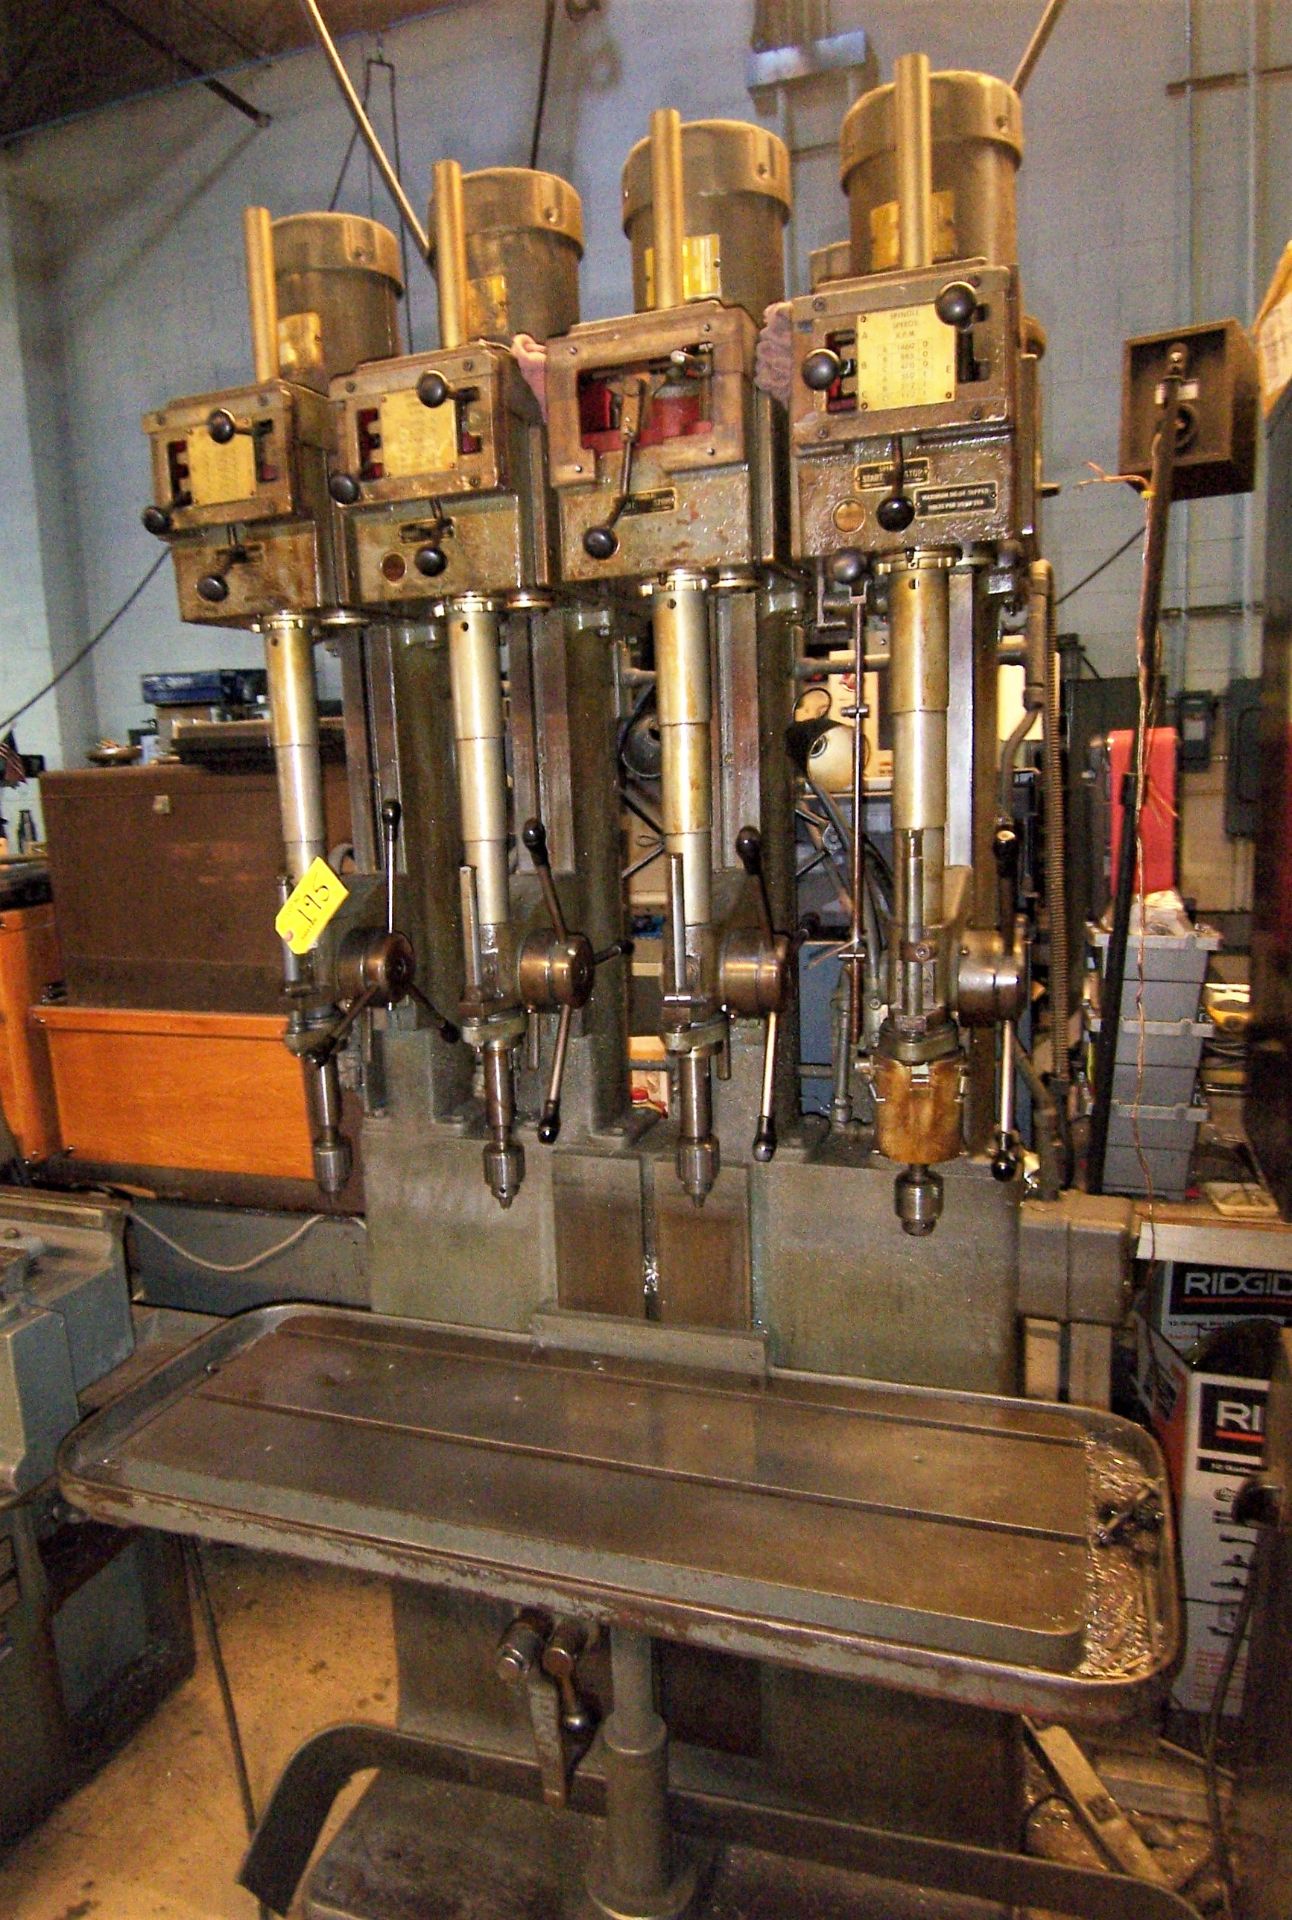 15" POLLARD 4-SPINDLE PRODUCTION DRILL, WITH 15" X 4" HAND CRANK TABLE, SPINDLE SPEEDS 226-2920 RPM - Image 2 of 2